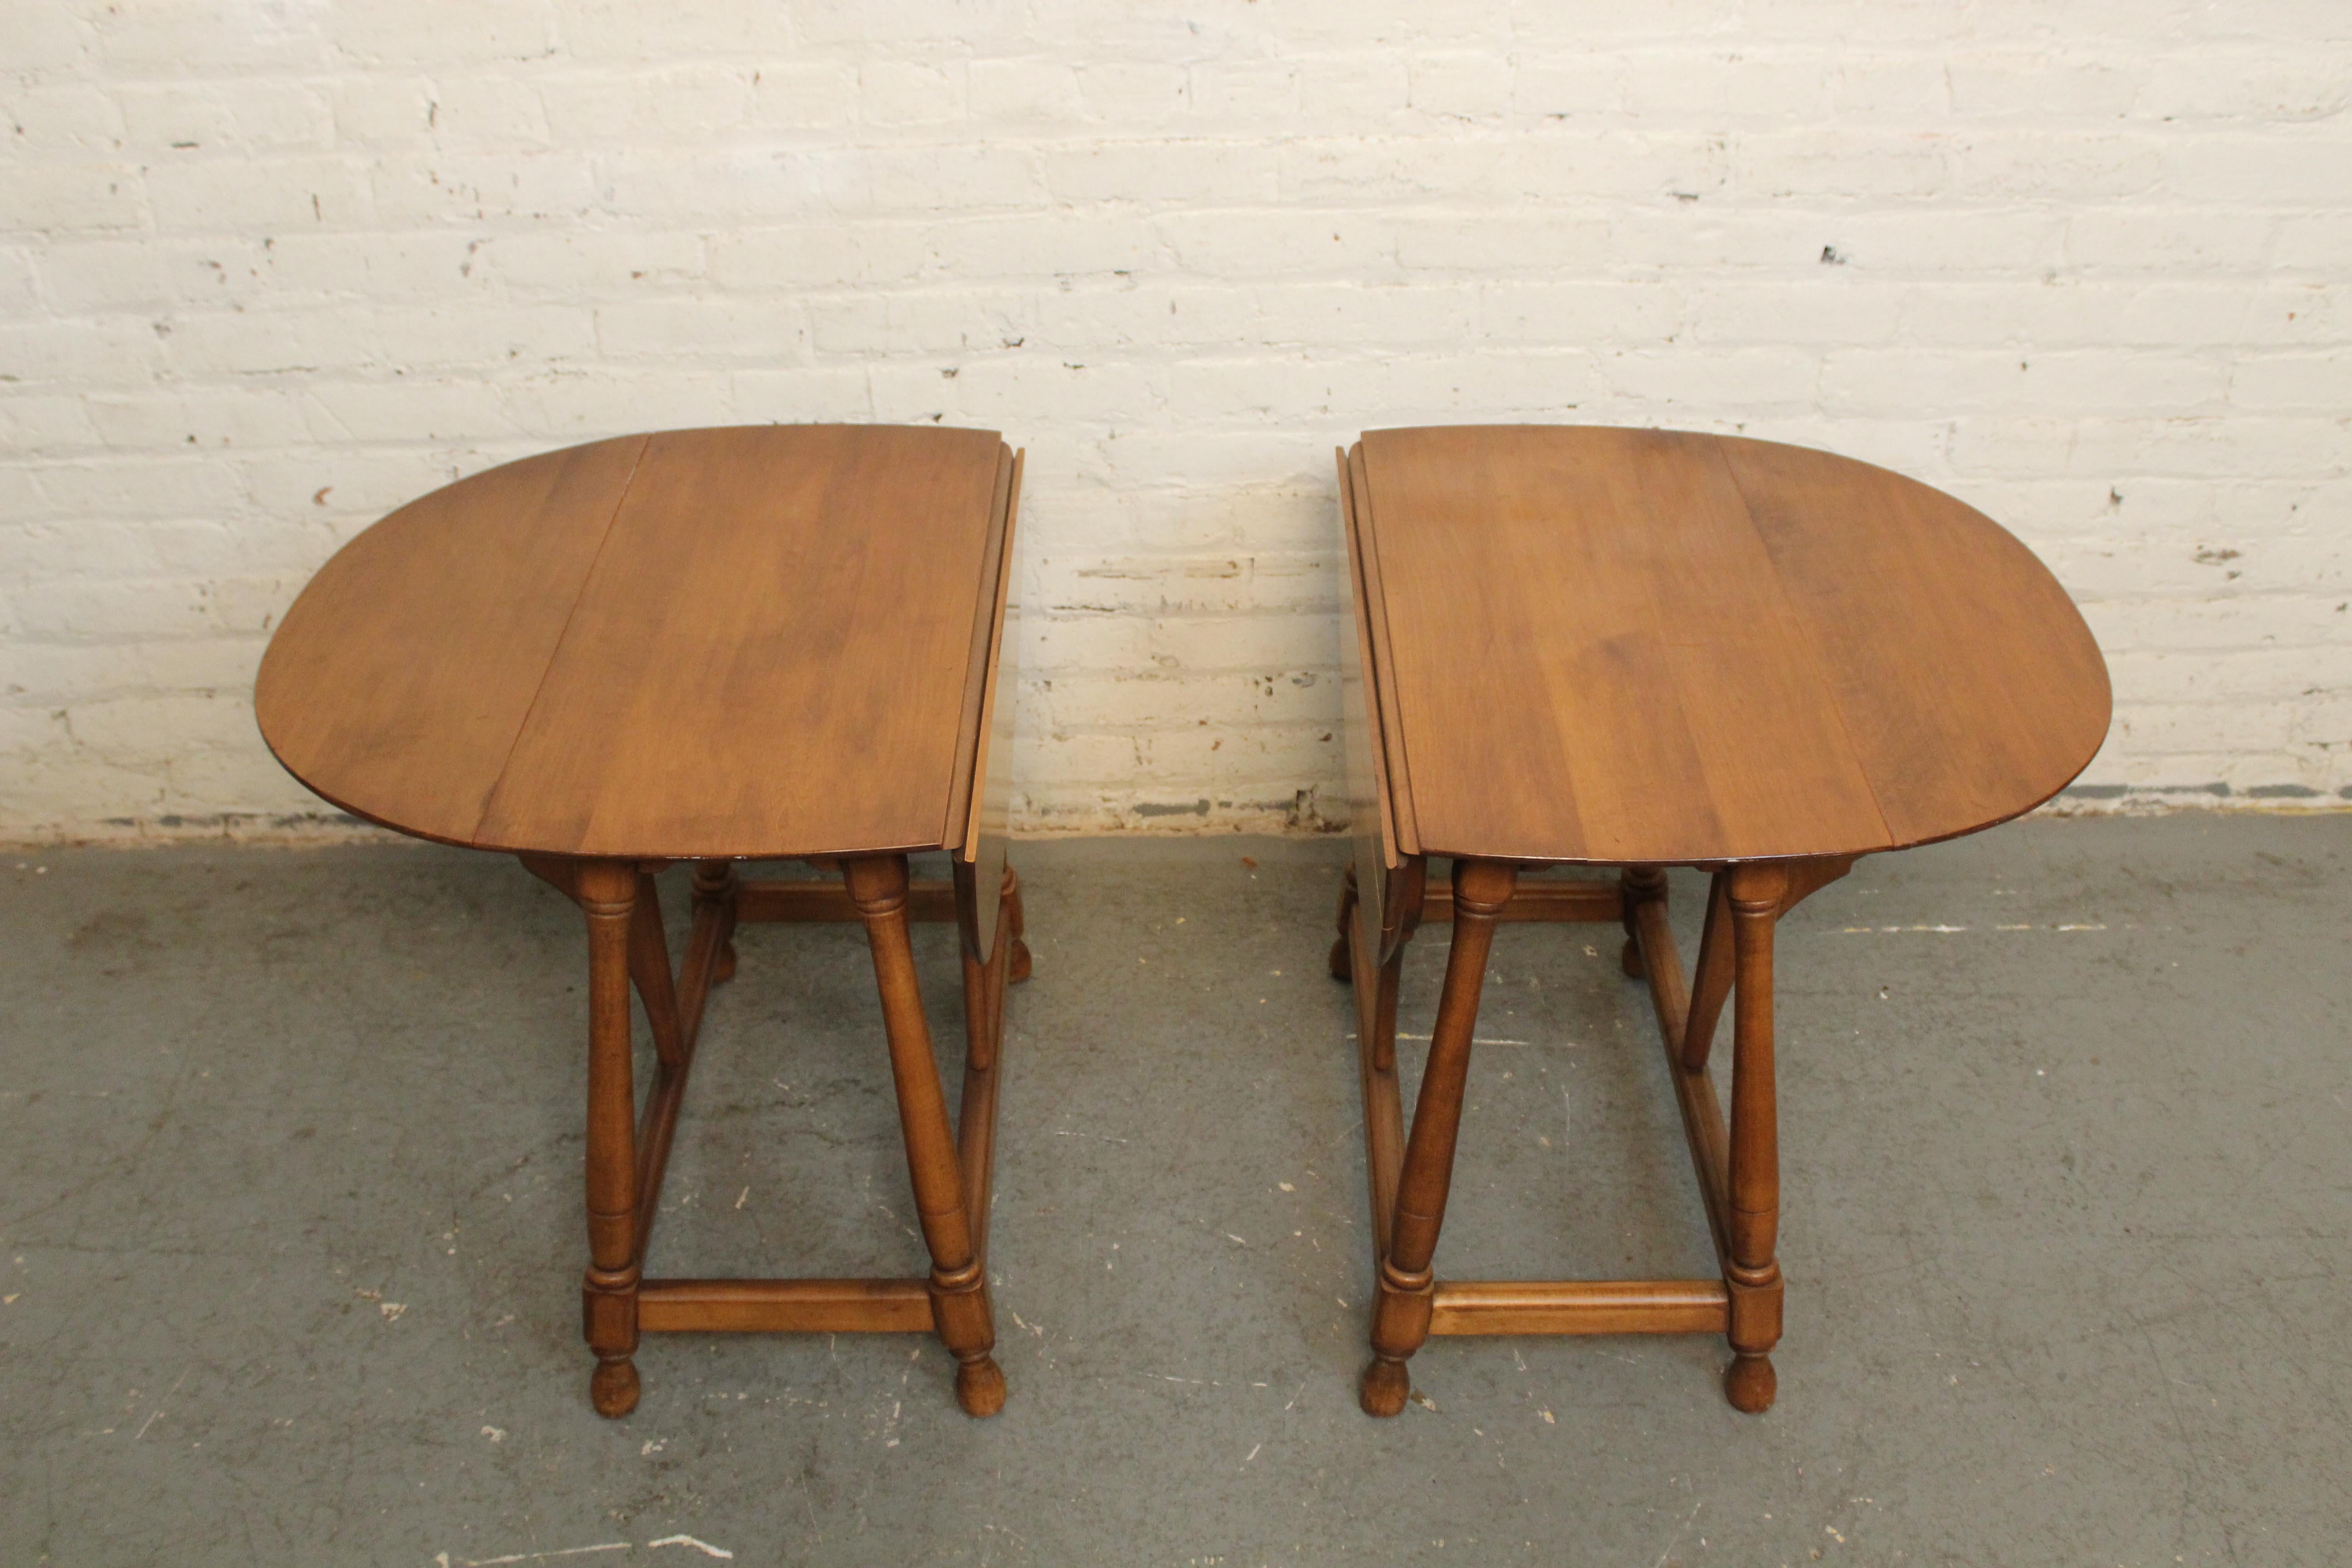 American Mid-Century Colonial Revival Maple Drop Leaf Tables For Sale